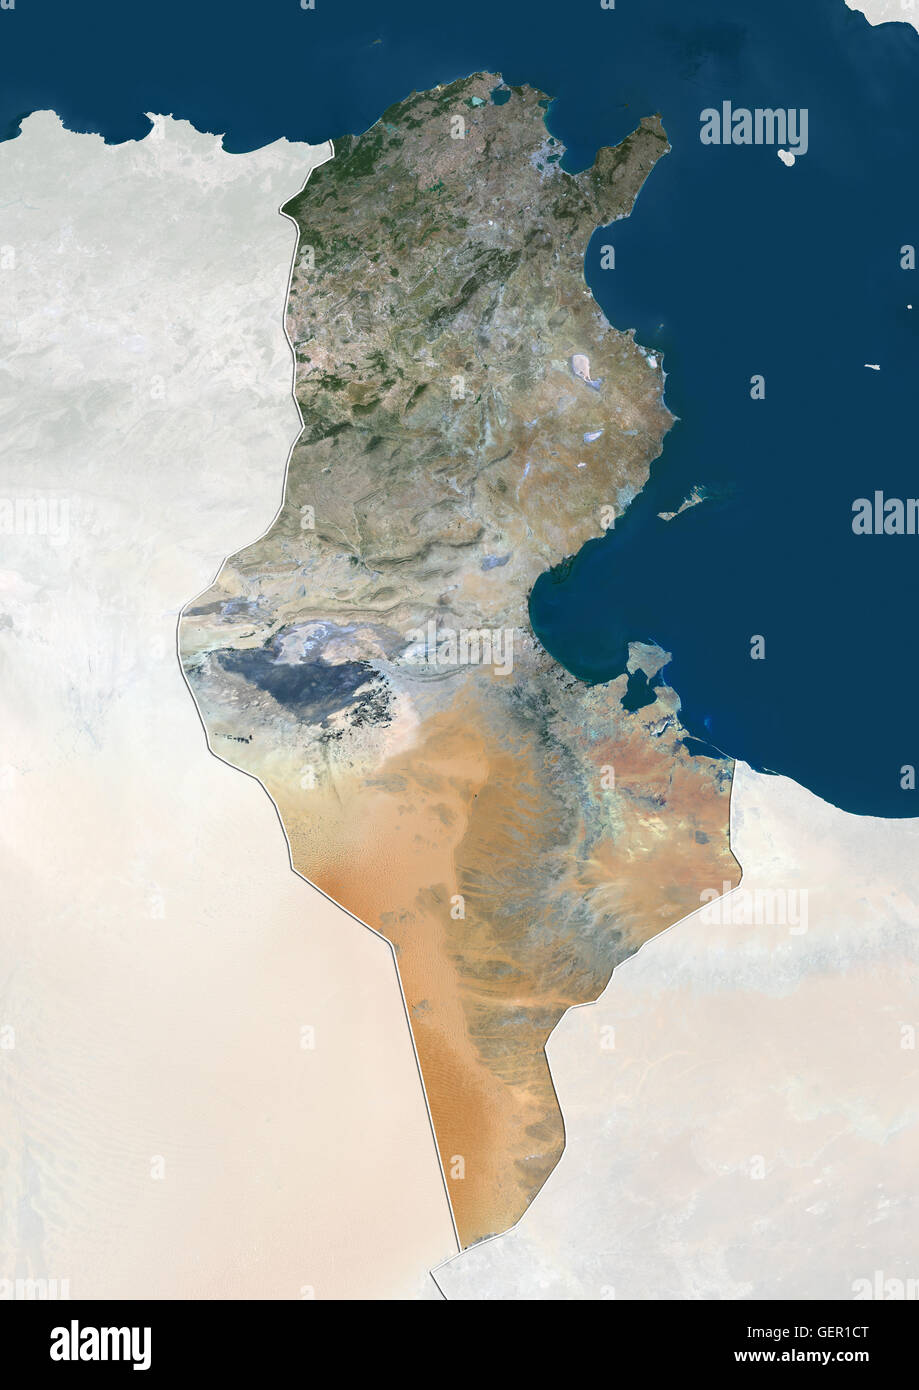 Satellite view of Tunisia (with country boundaries and mask). This image was compiled from data acquired by Landsat 8 satellite in 2014. Stock Photo